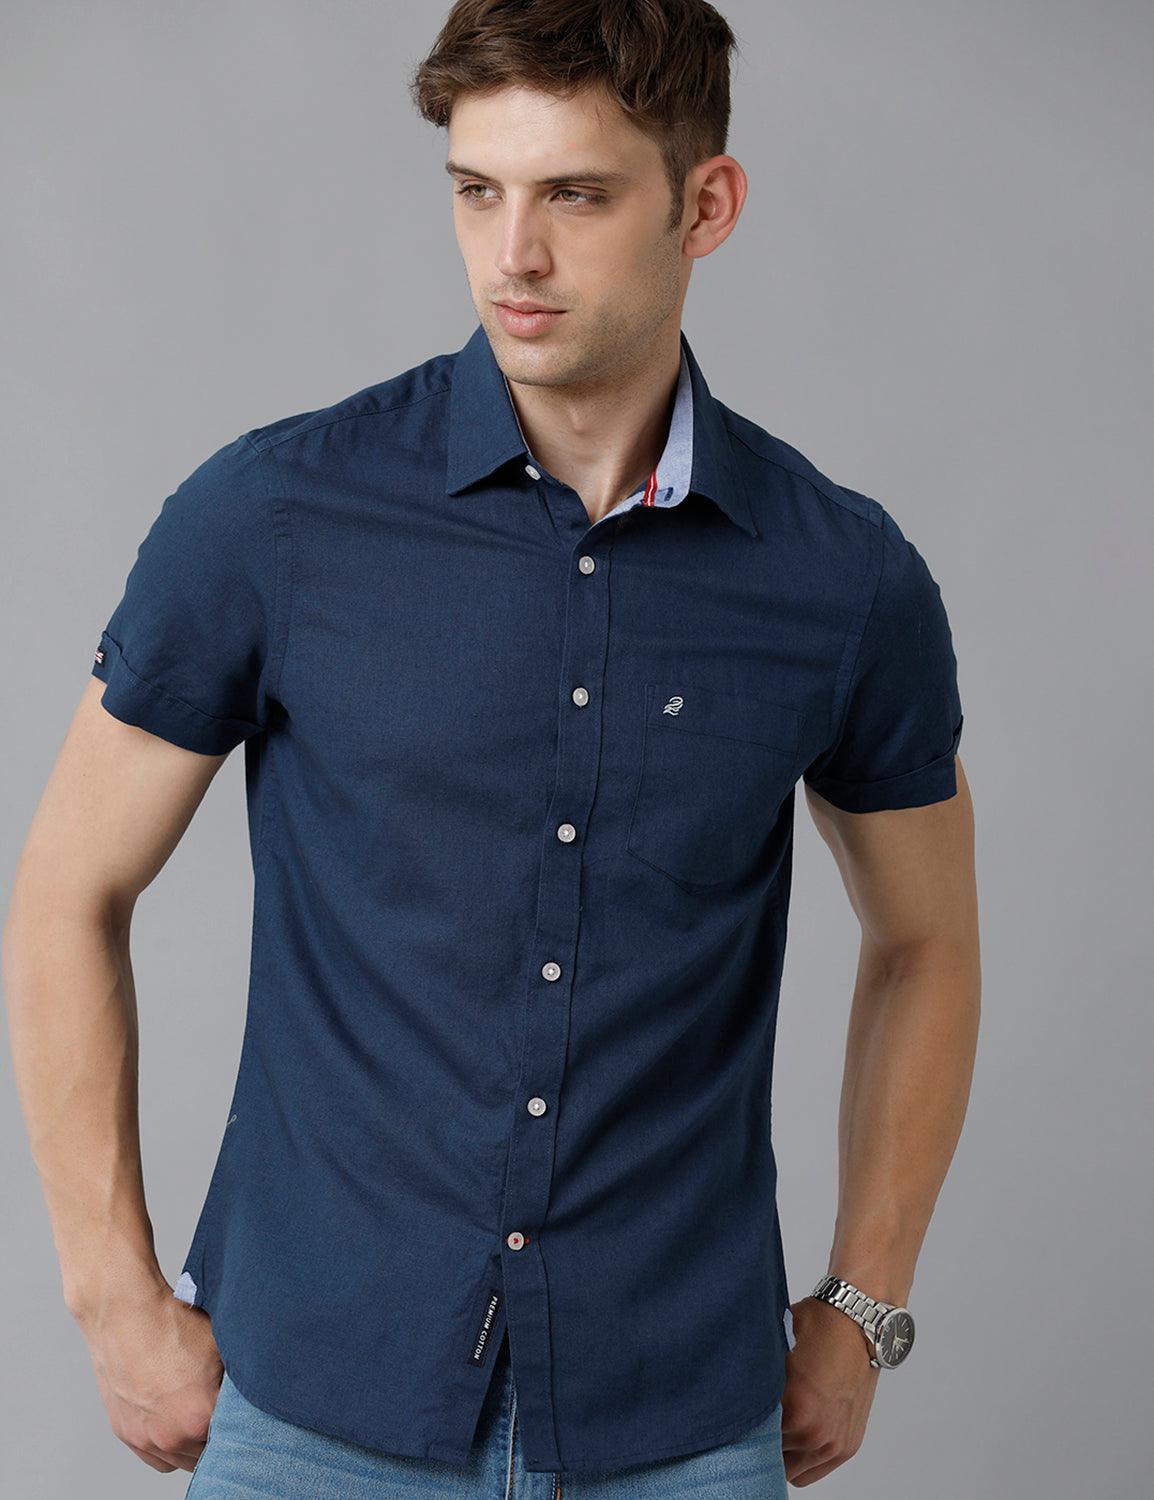 Solid Navy Blue Cotton Lenin Slim Fit Casual Shirt - Double Two